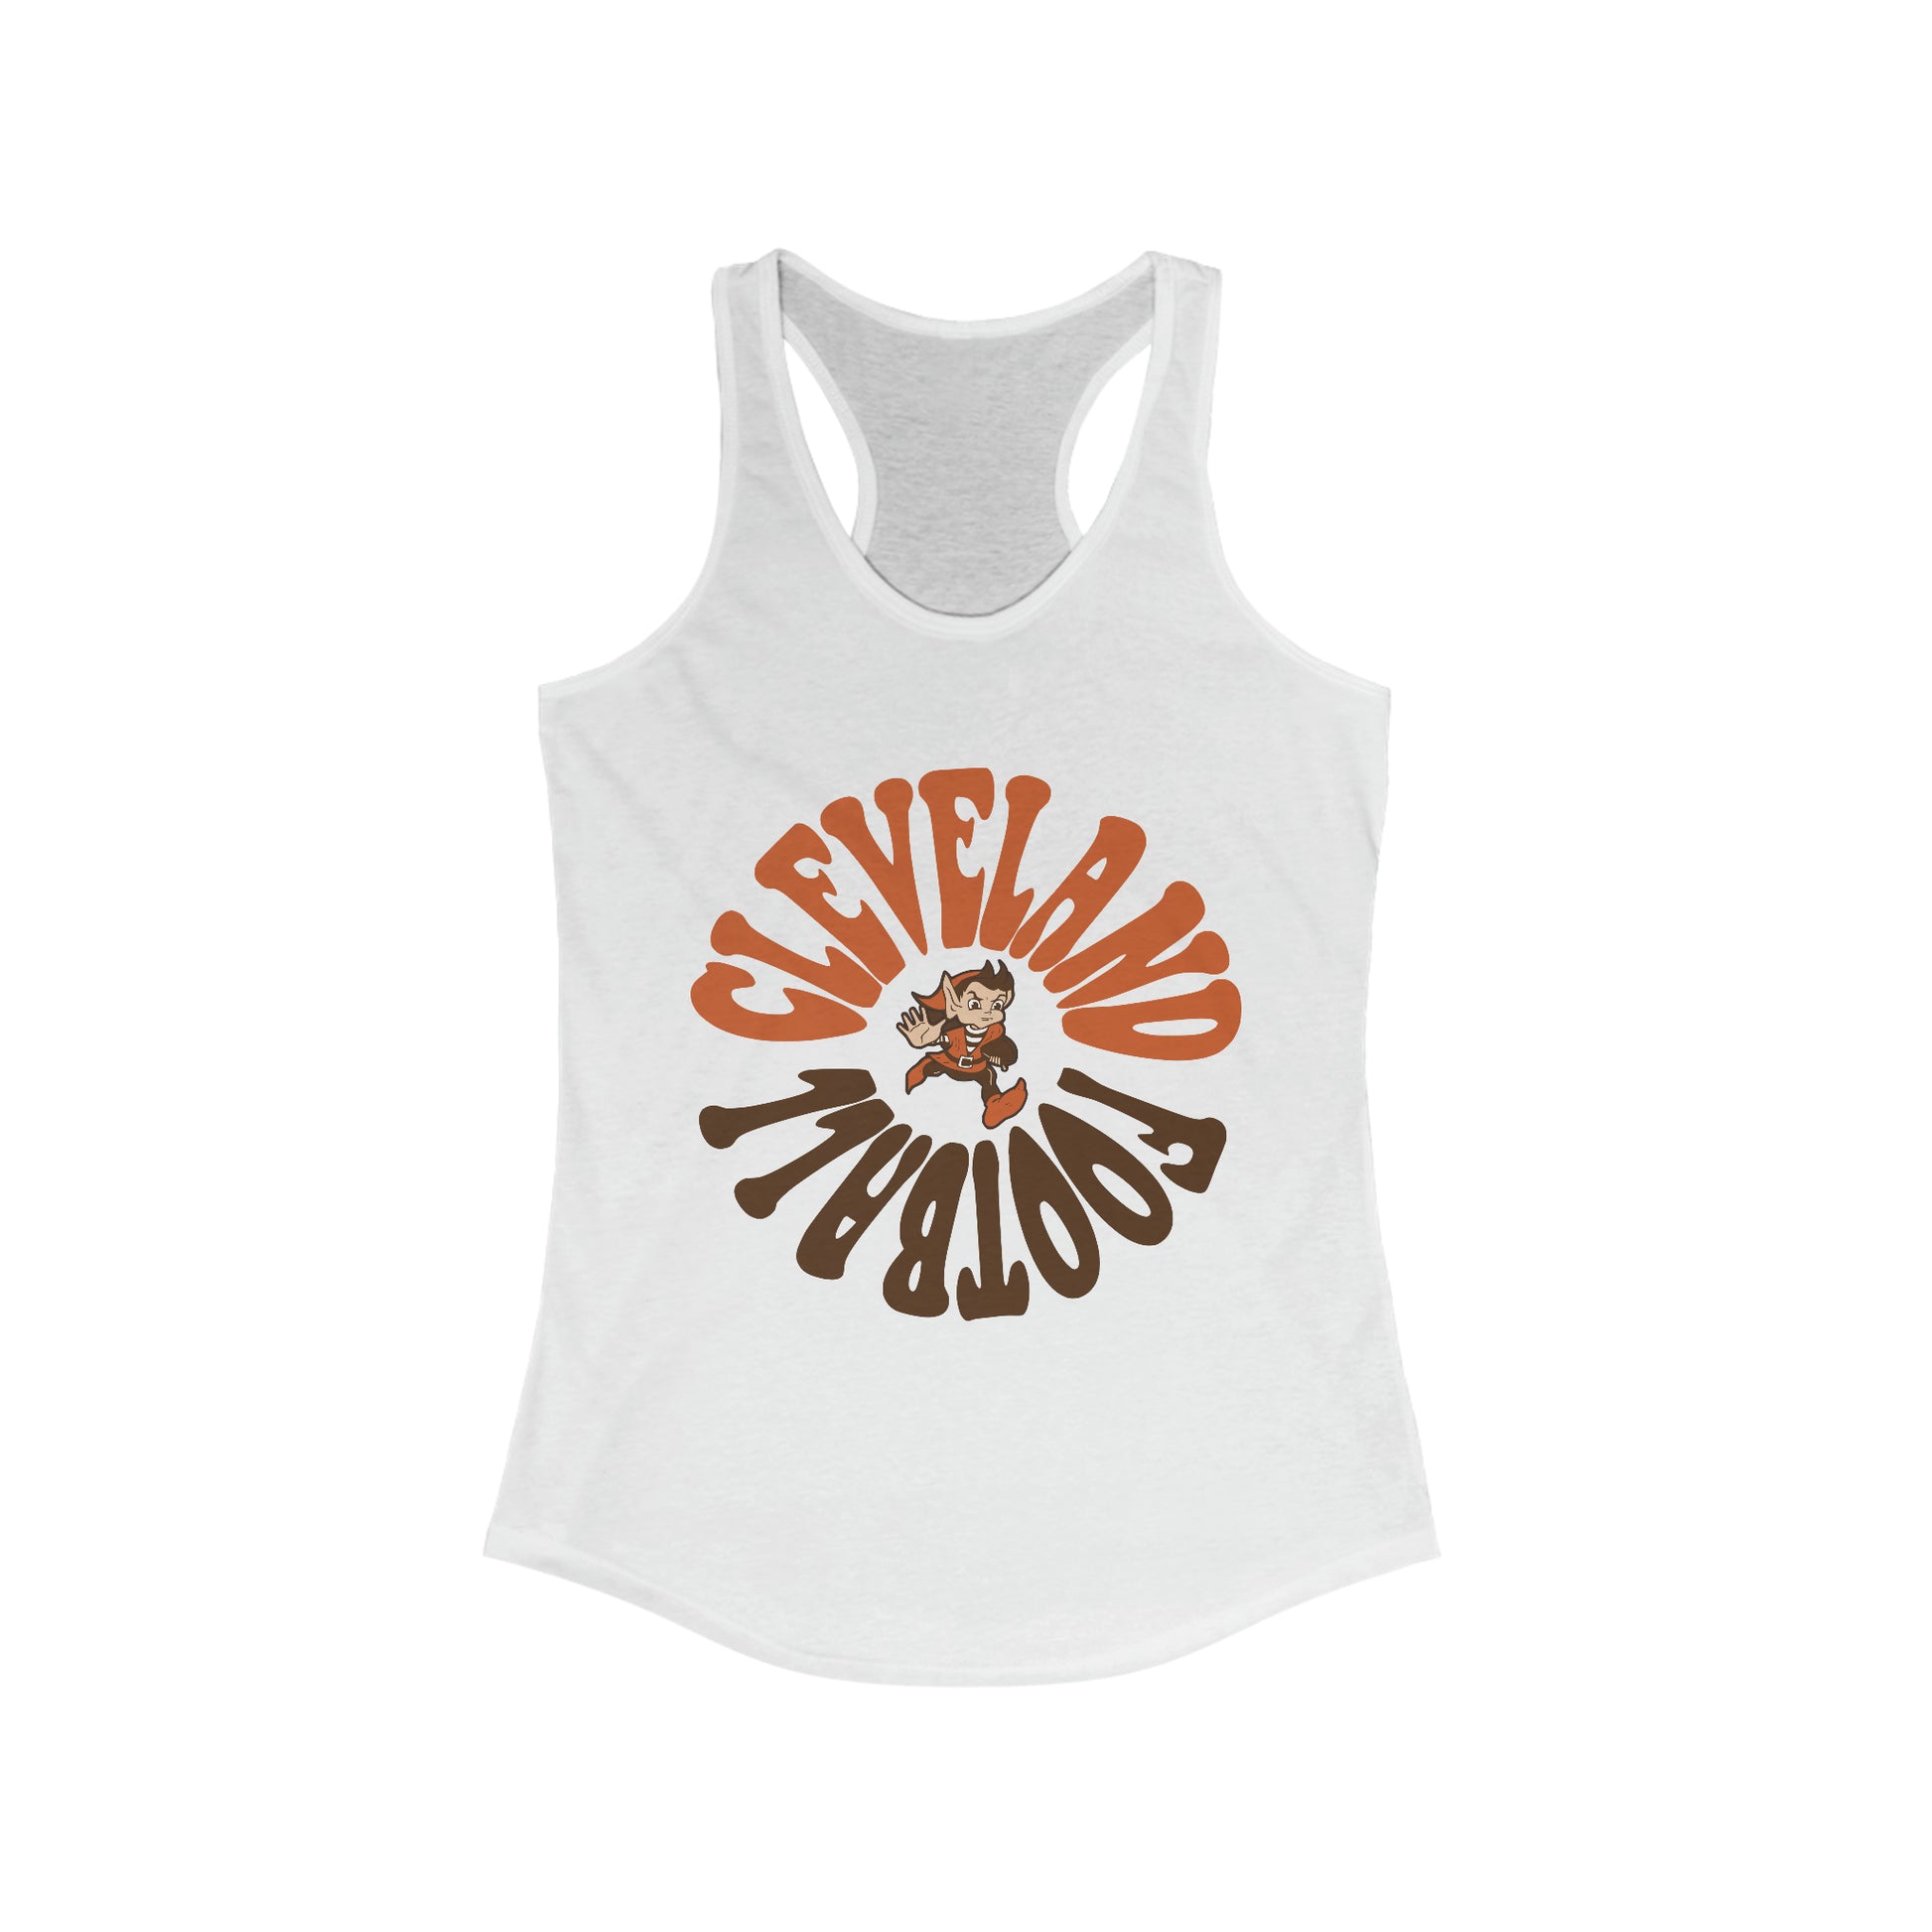 Cleveland Browns Women's Tank Top - NFL Football Workout Tank Browns Ladies Top - Gray - Design 5